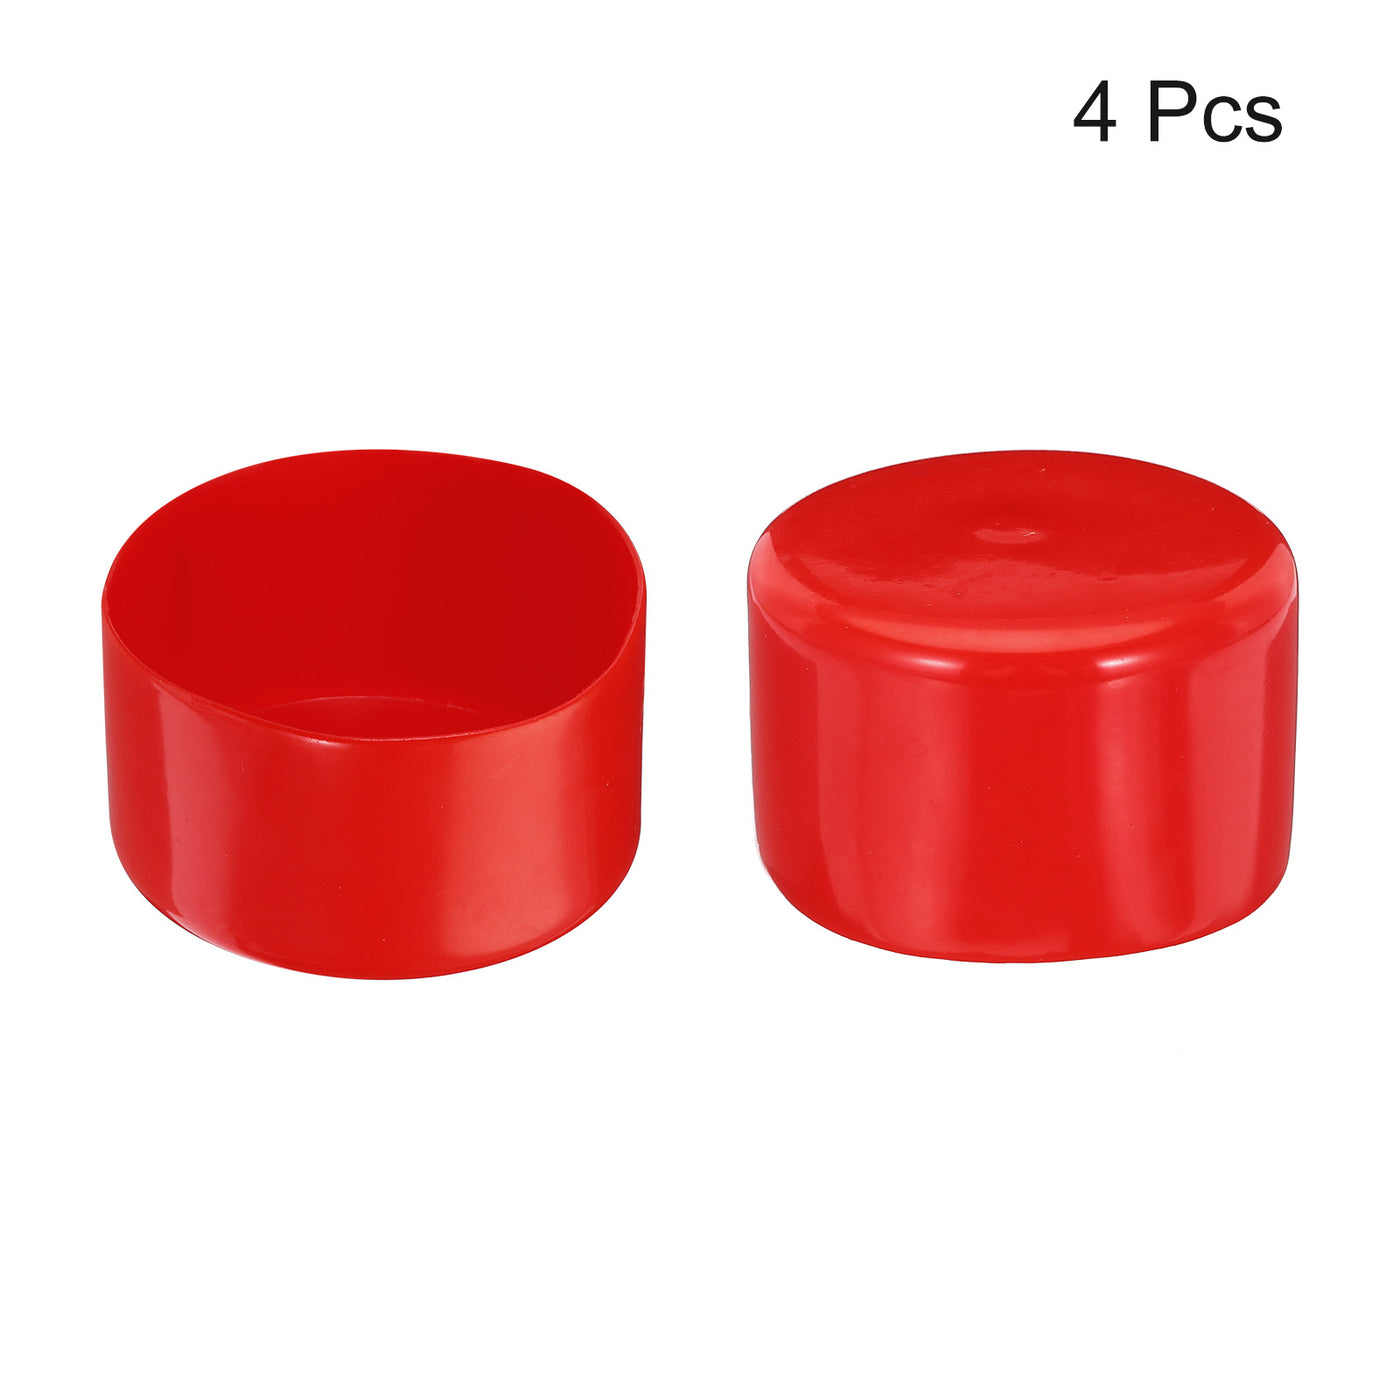 uxcell Uxcell 4pcs Rubber End Caps 75mm ID Vinyl Round Tube Bolt Cap Cover Screw Thread Protectors Red